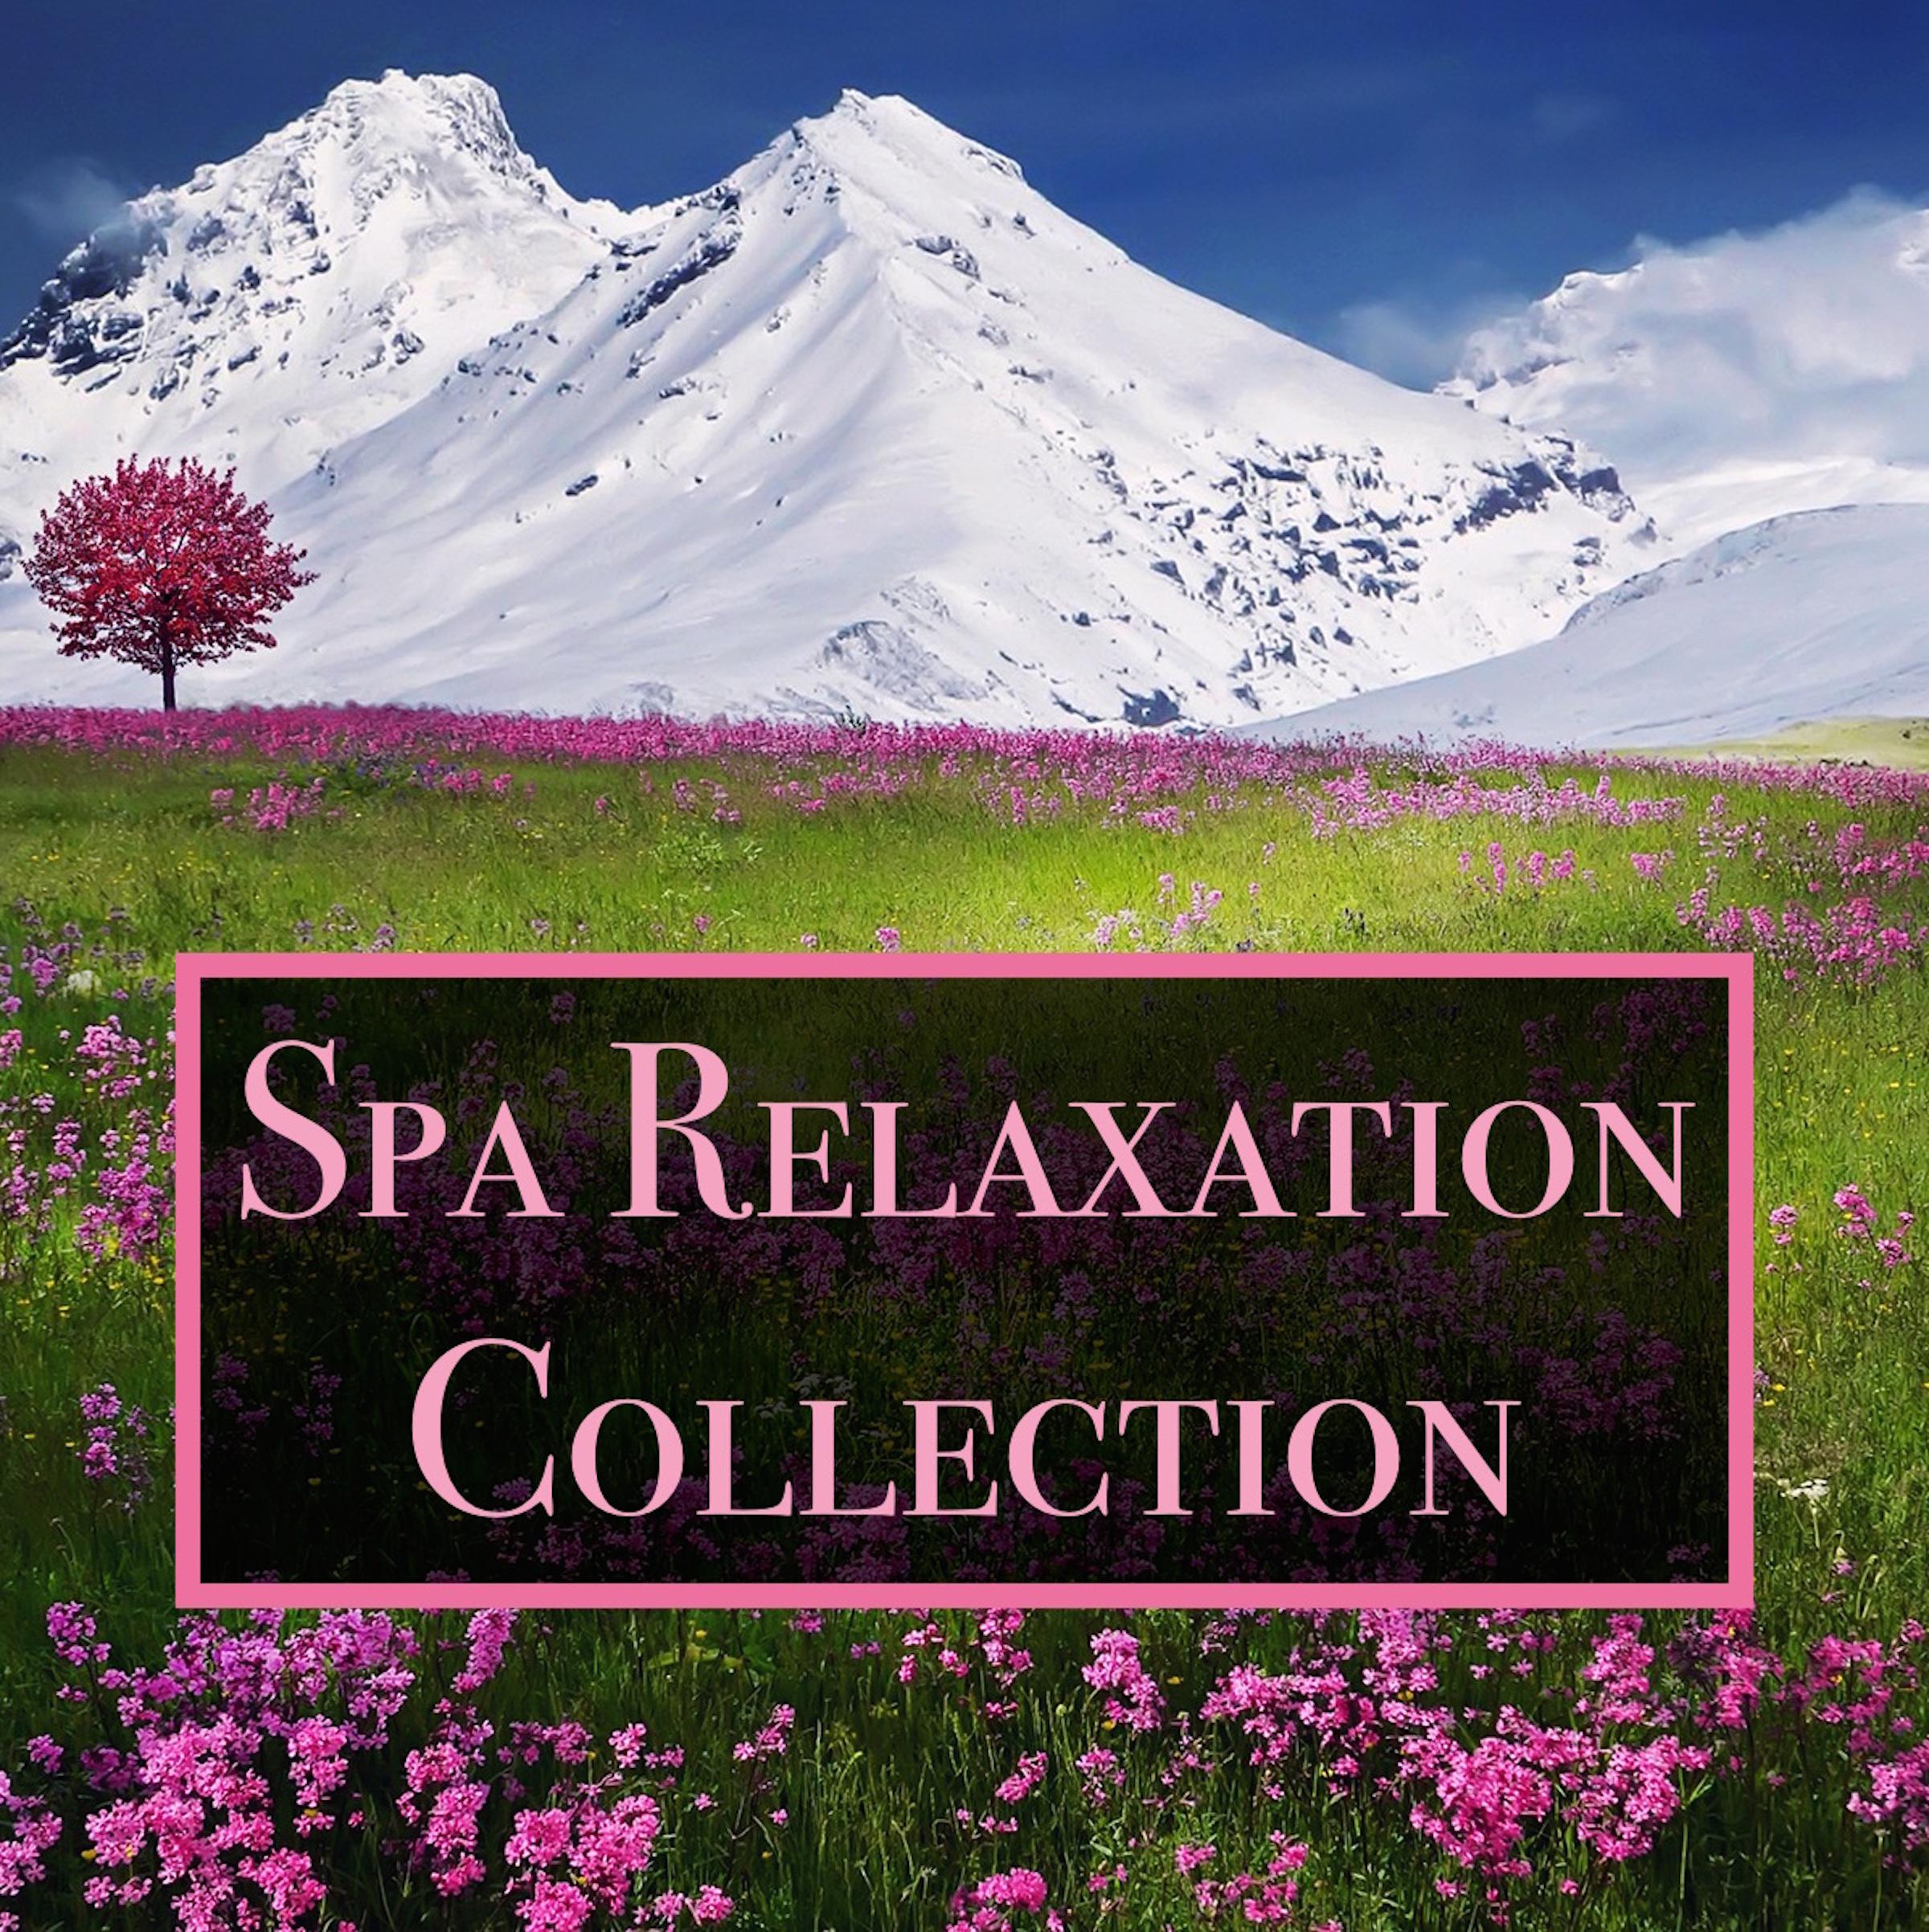 Spa Relaxation Collection - 20 Relaxing Water and Ocean Sounds for Deep Meditation, Massage, Yoga, Focus and Concentration